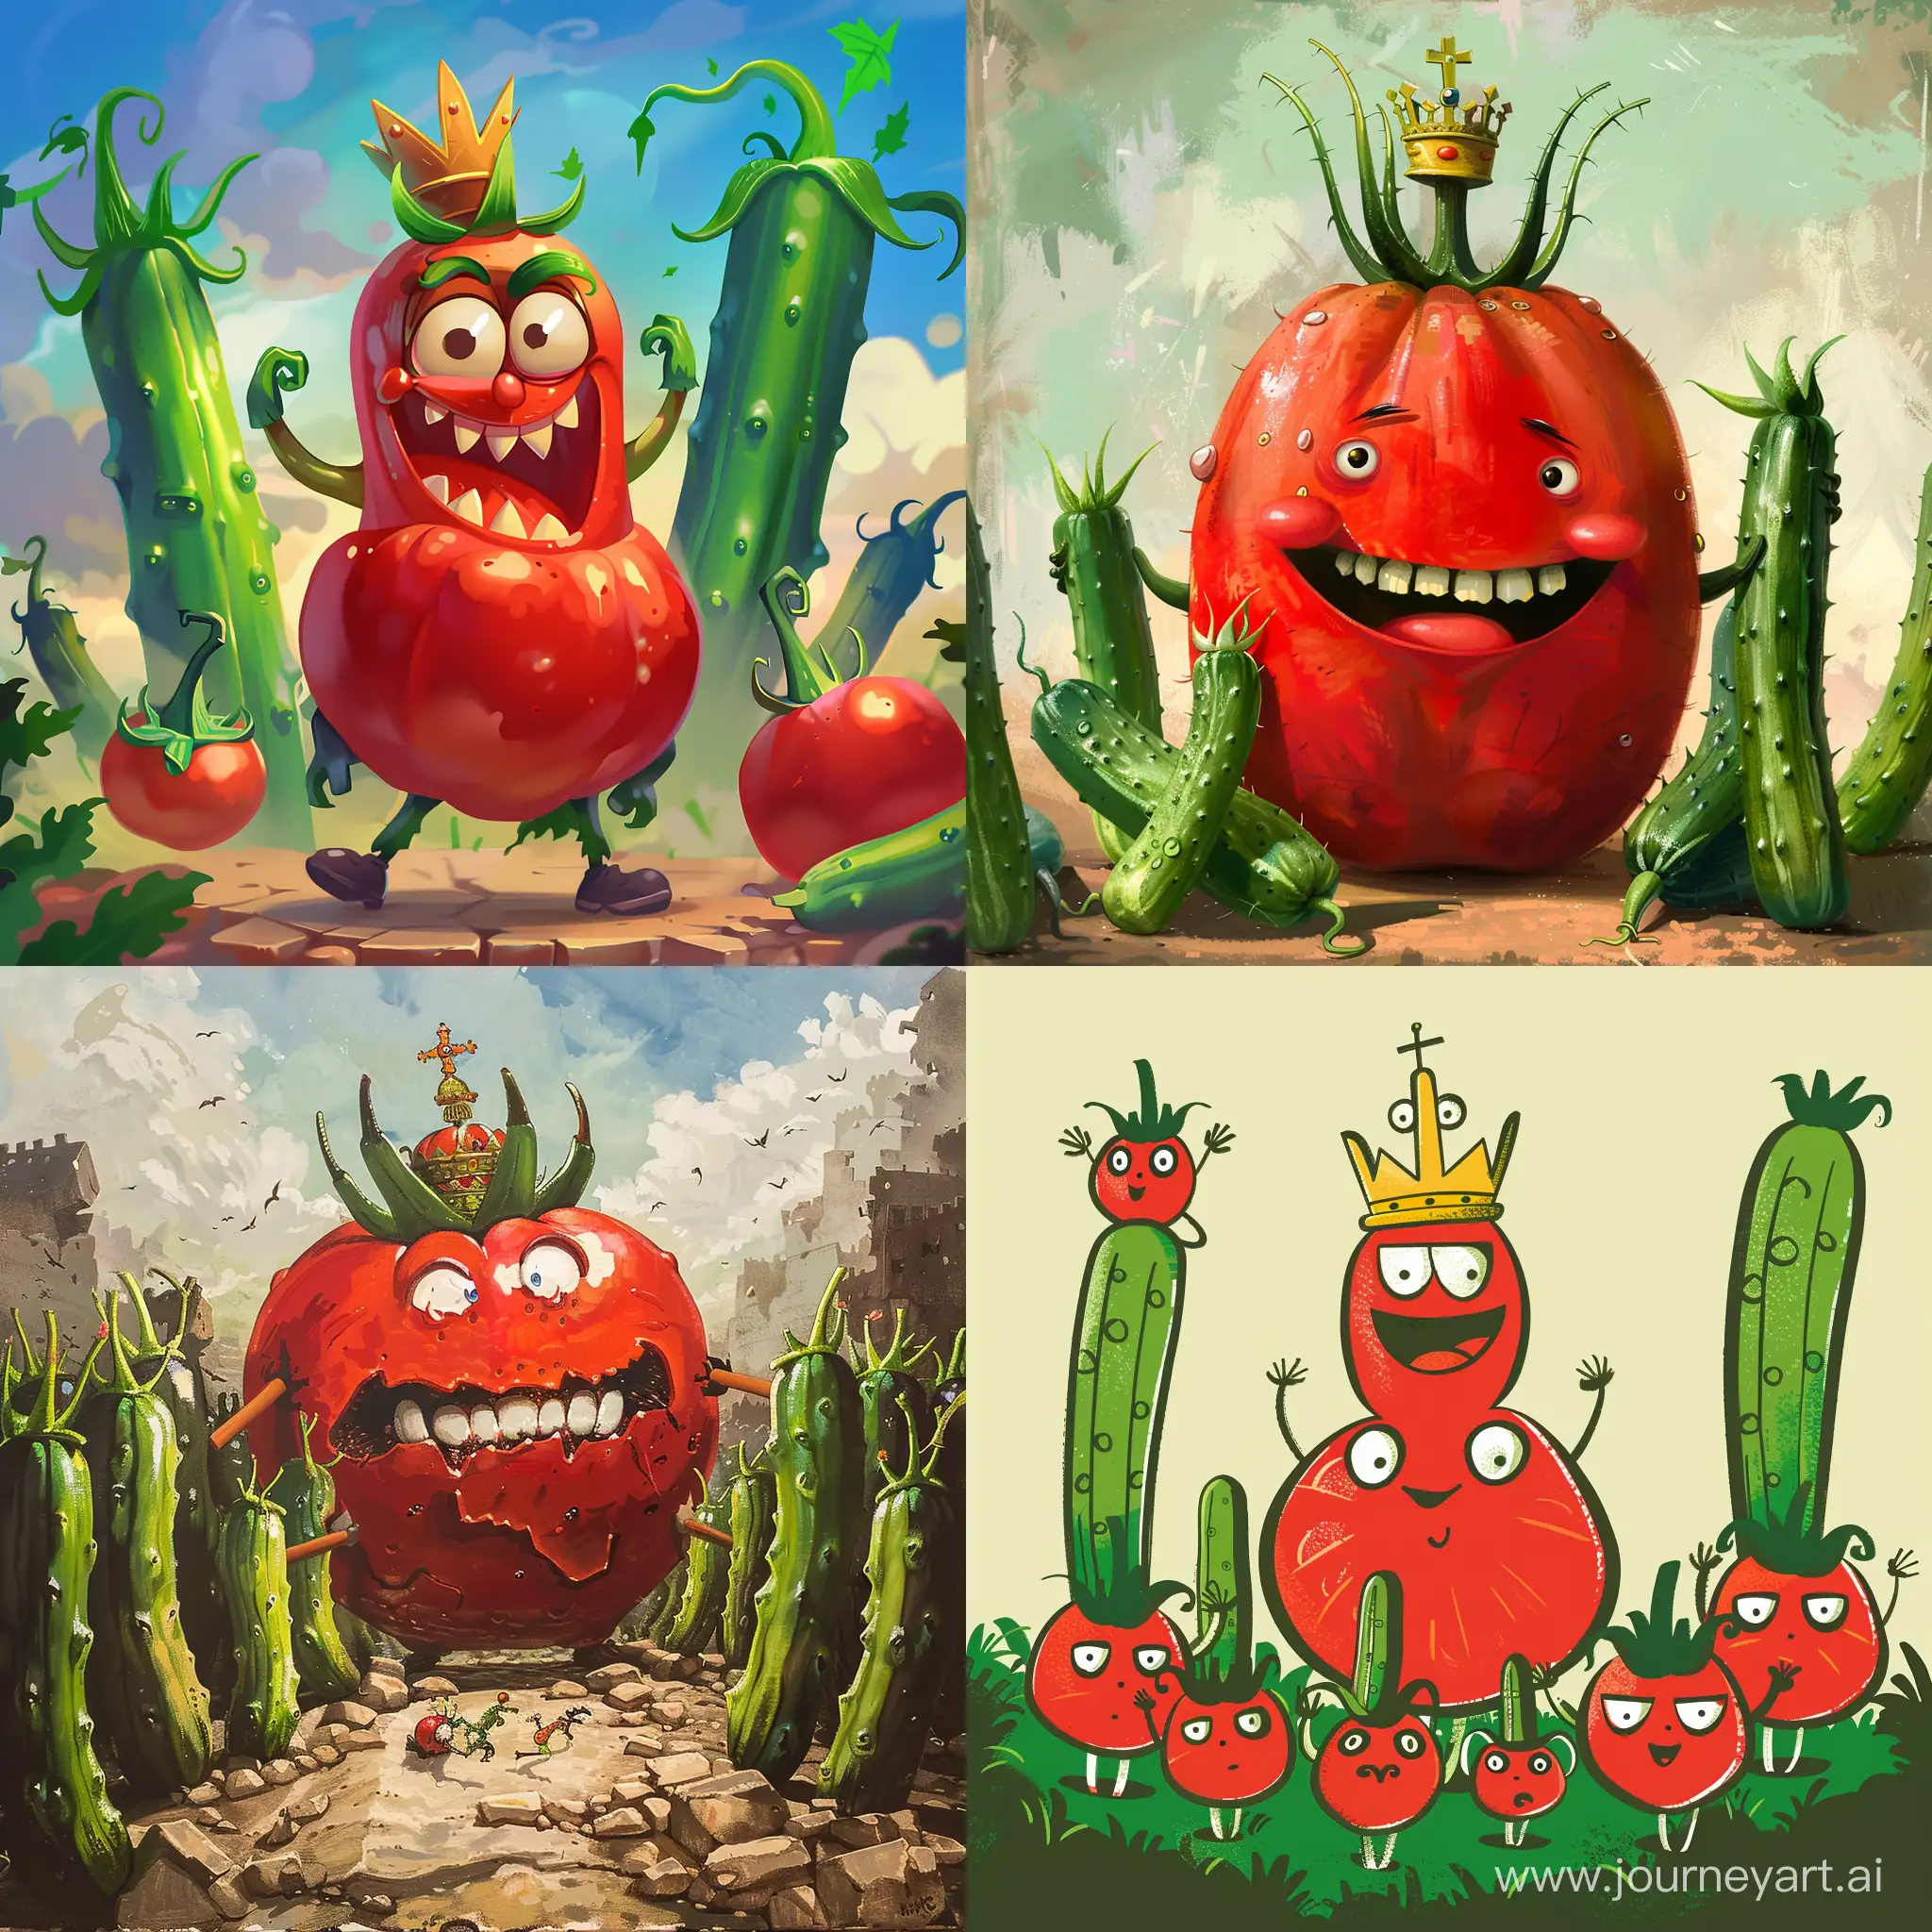 Tomato-King-Leading-Cucumber-Army-in-Surreal-Battle